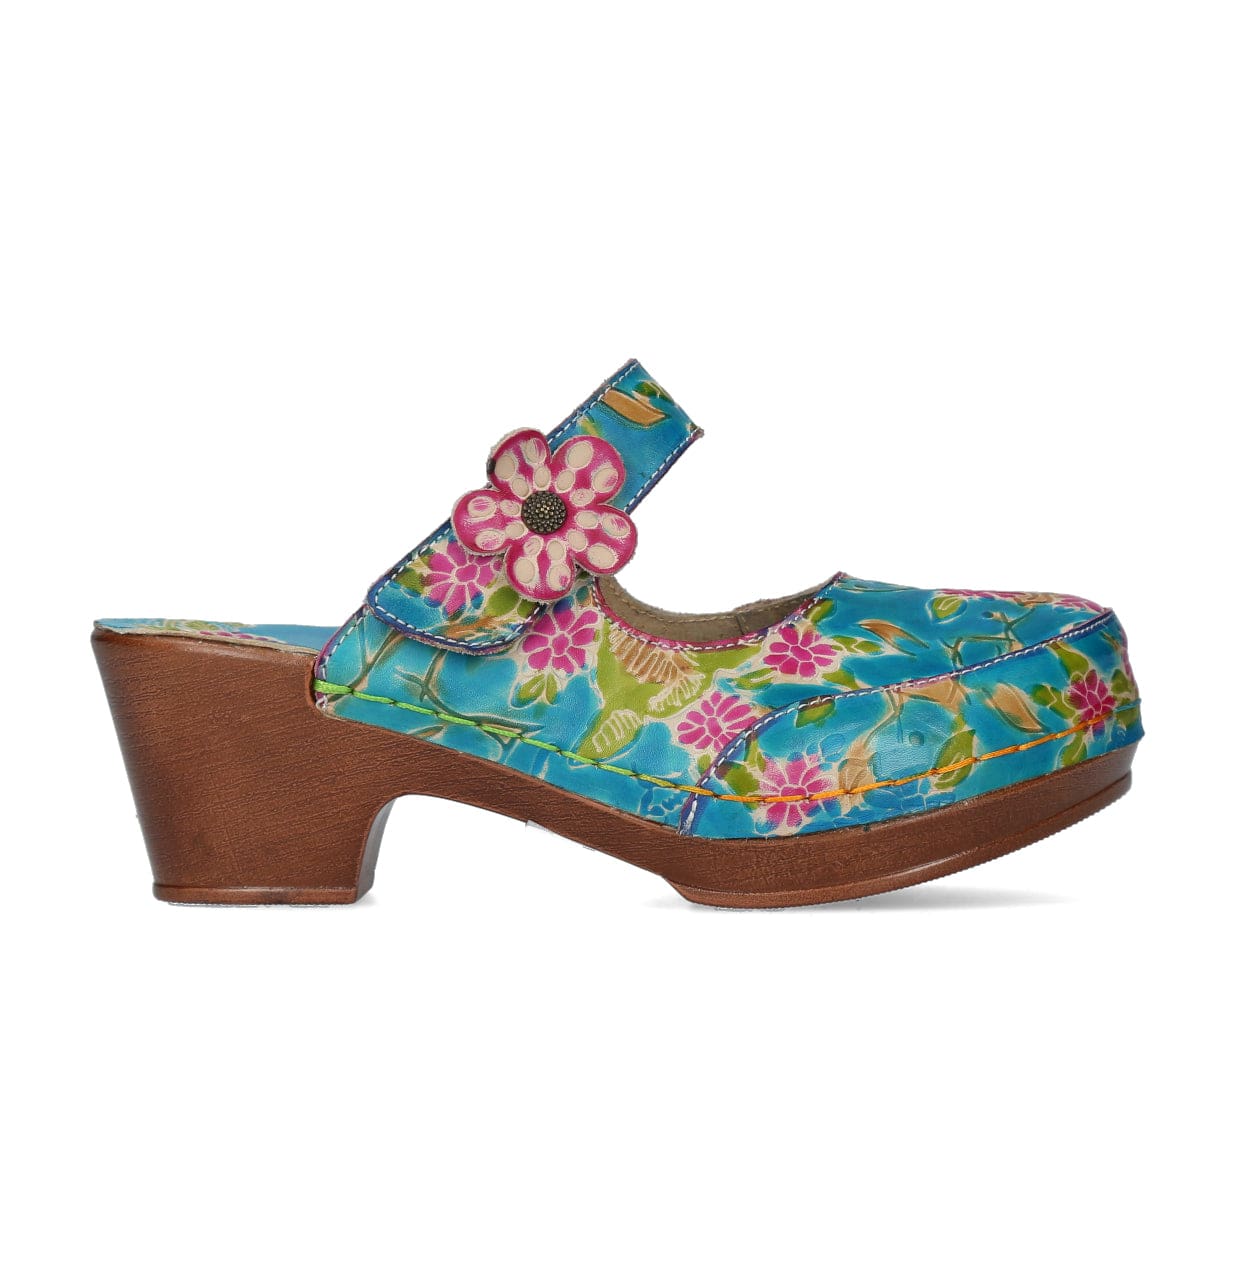 Chaussures LINONO 13 - 35 / Turquoise - Mule